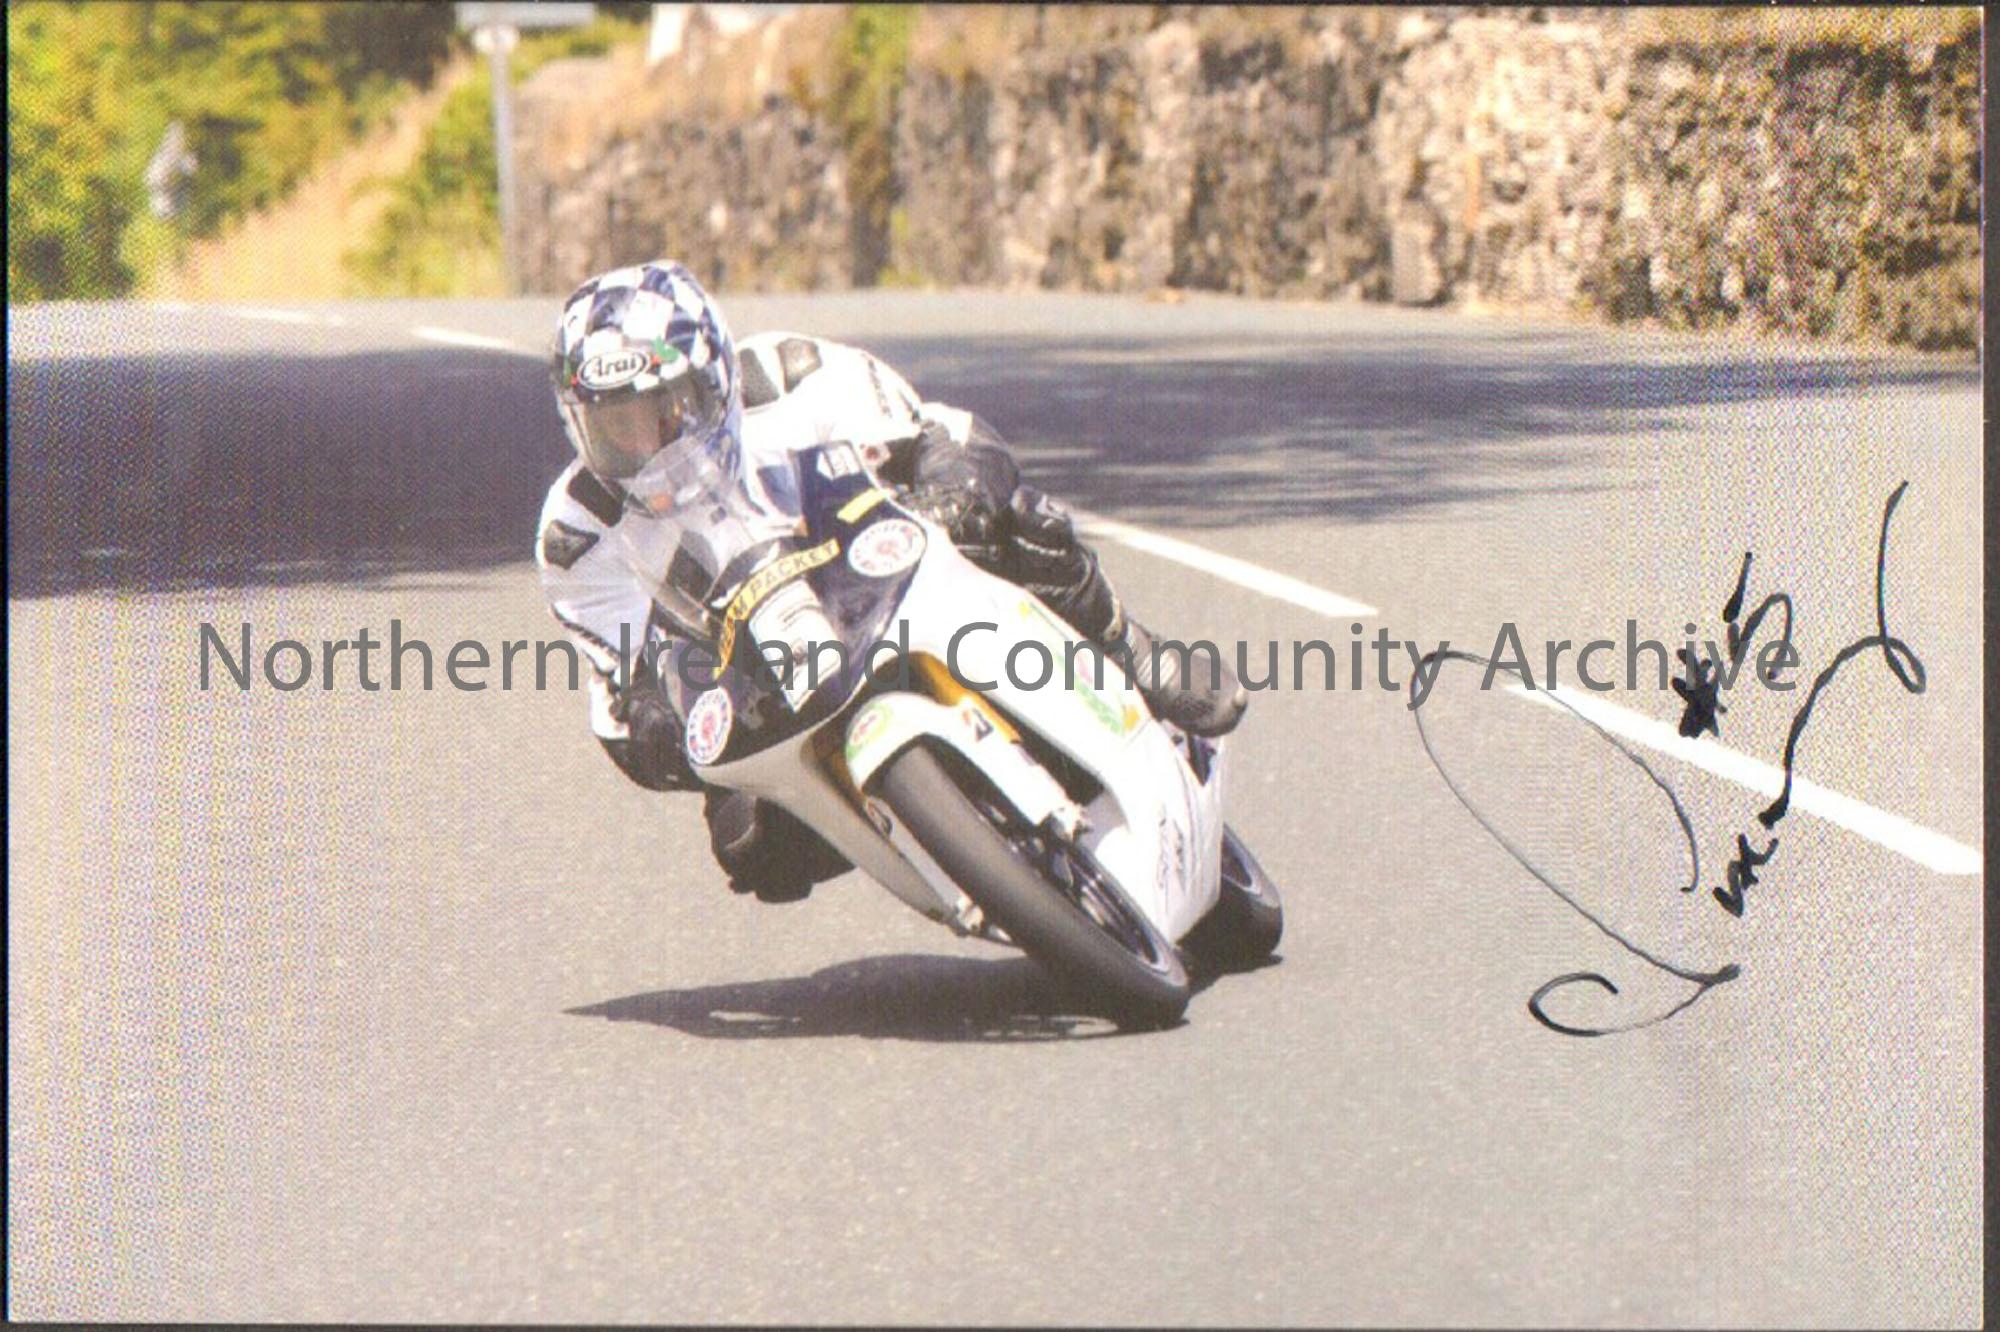 Signed photograph of Chris Palmer riding a black and white motorbike with number 5 on the front and wearing black and white leathers on a wide road wi…